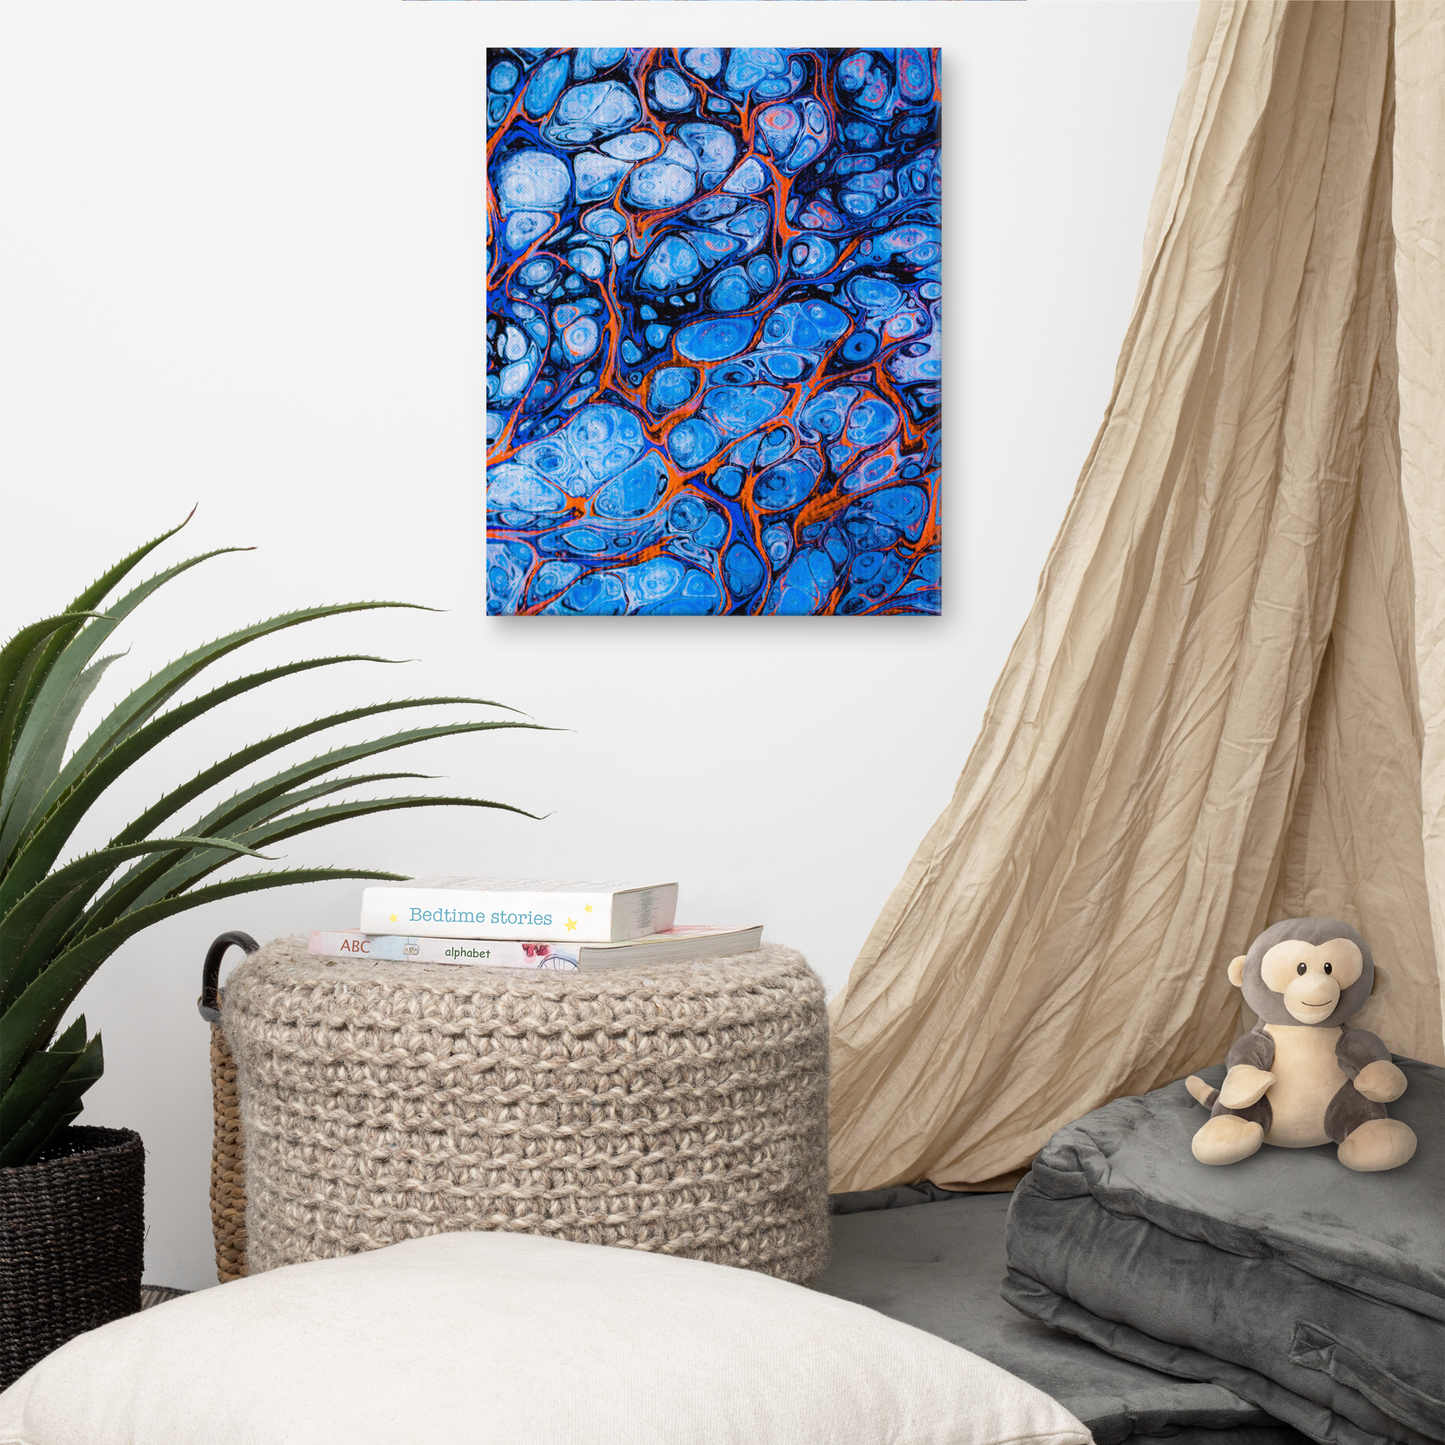 NightOwl Studio Abstract Wall Art, Blue Fire, Boho Living Room, Bedroom, Office, and Home Decor, Premium Canvas with Wooden Frame, Acrylic Painting Reproduction, 16” x 20”